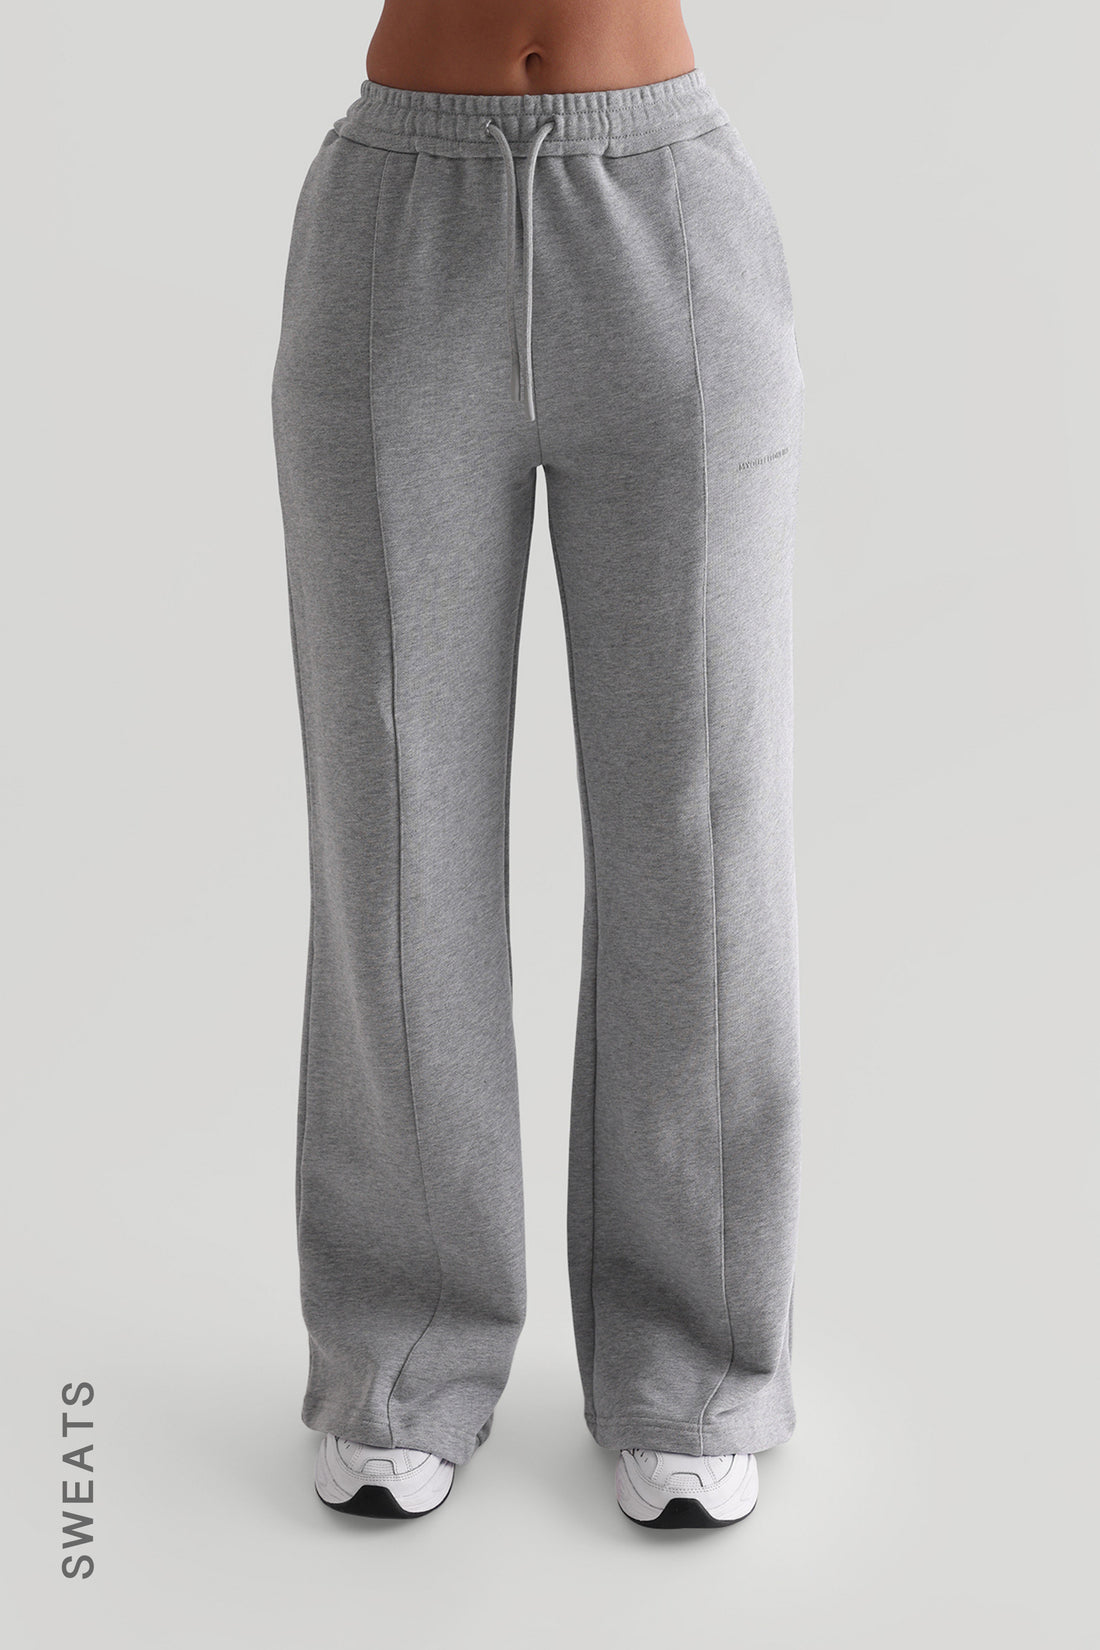 Structured Wide Leg Sweatpants  - Heather Gray